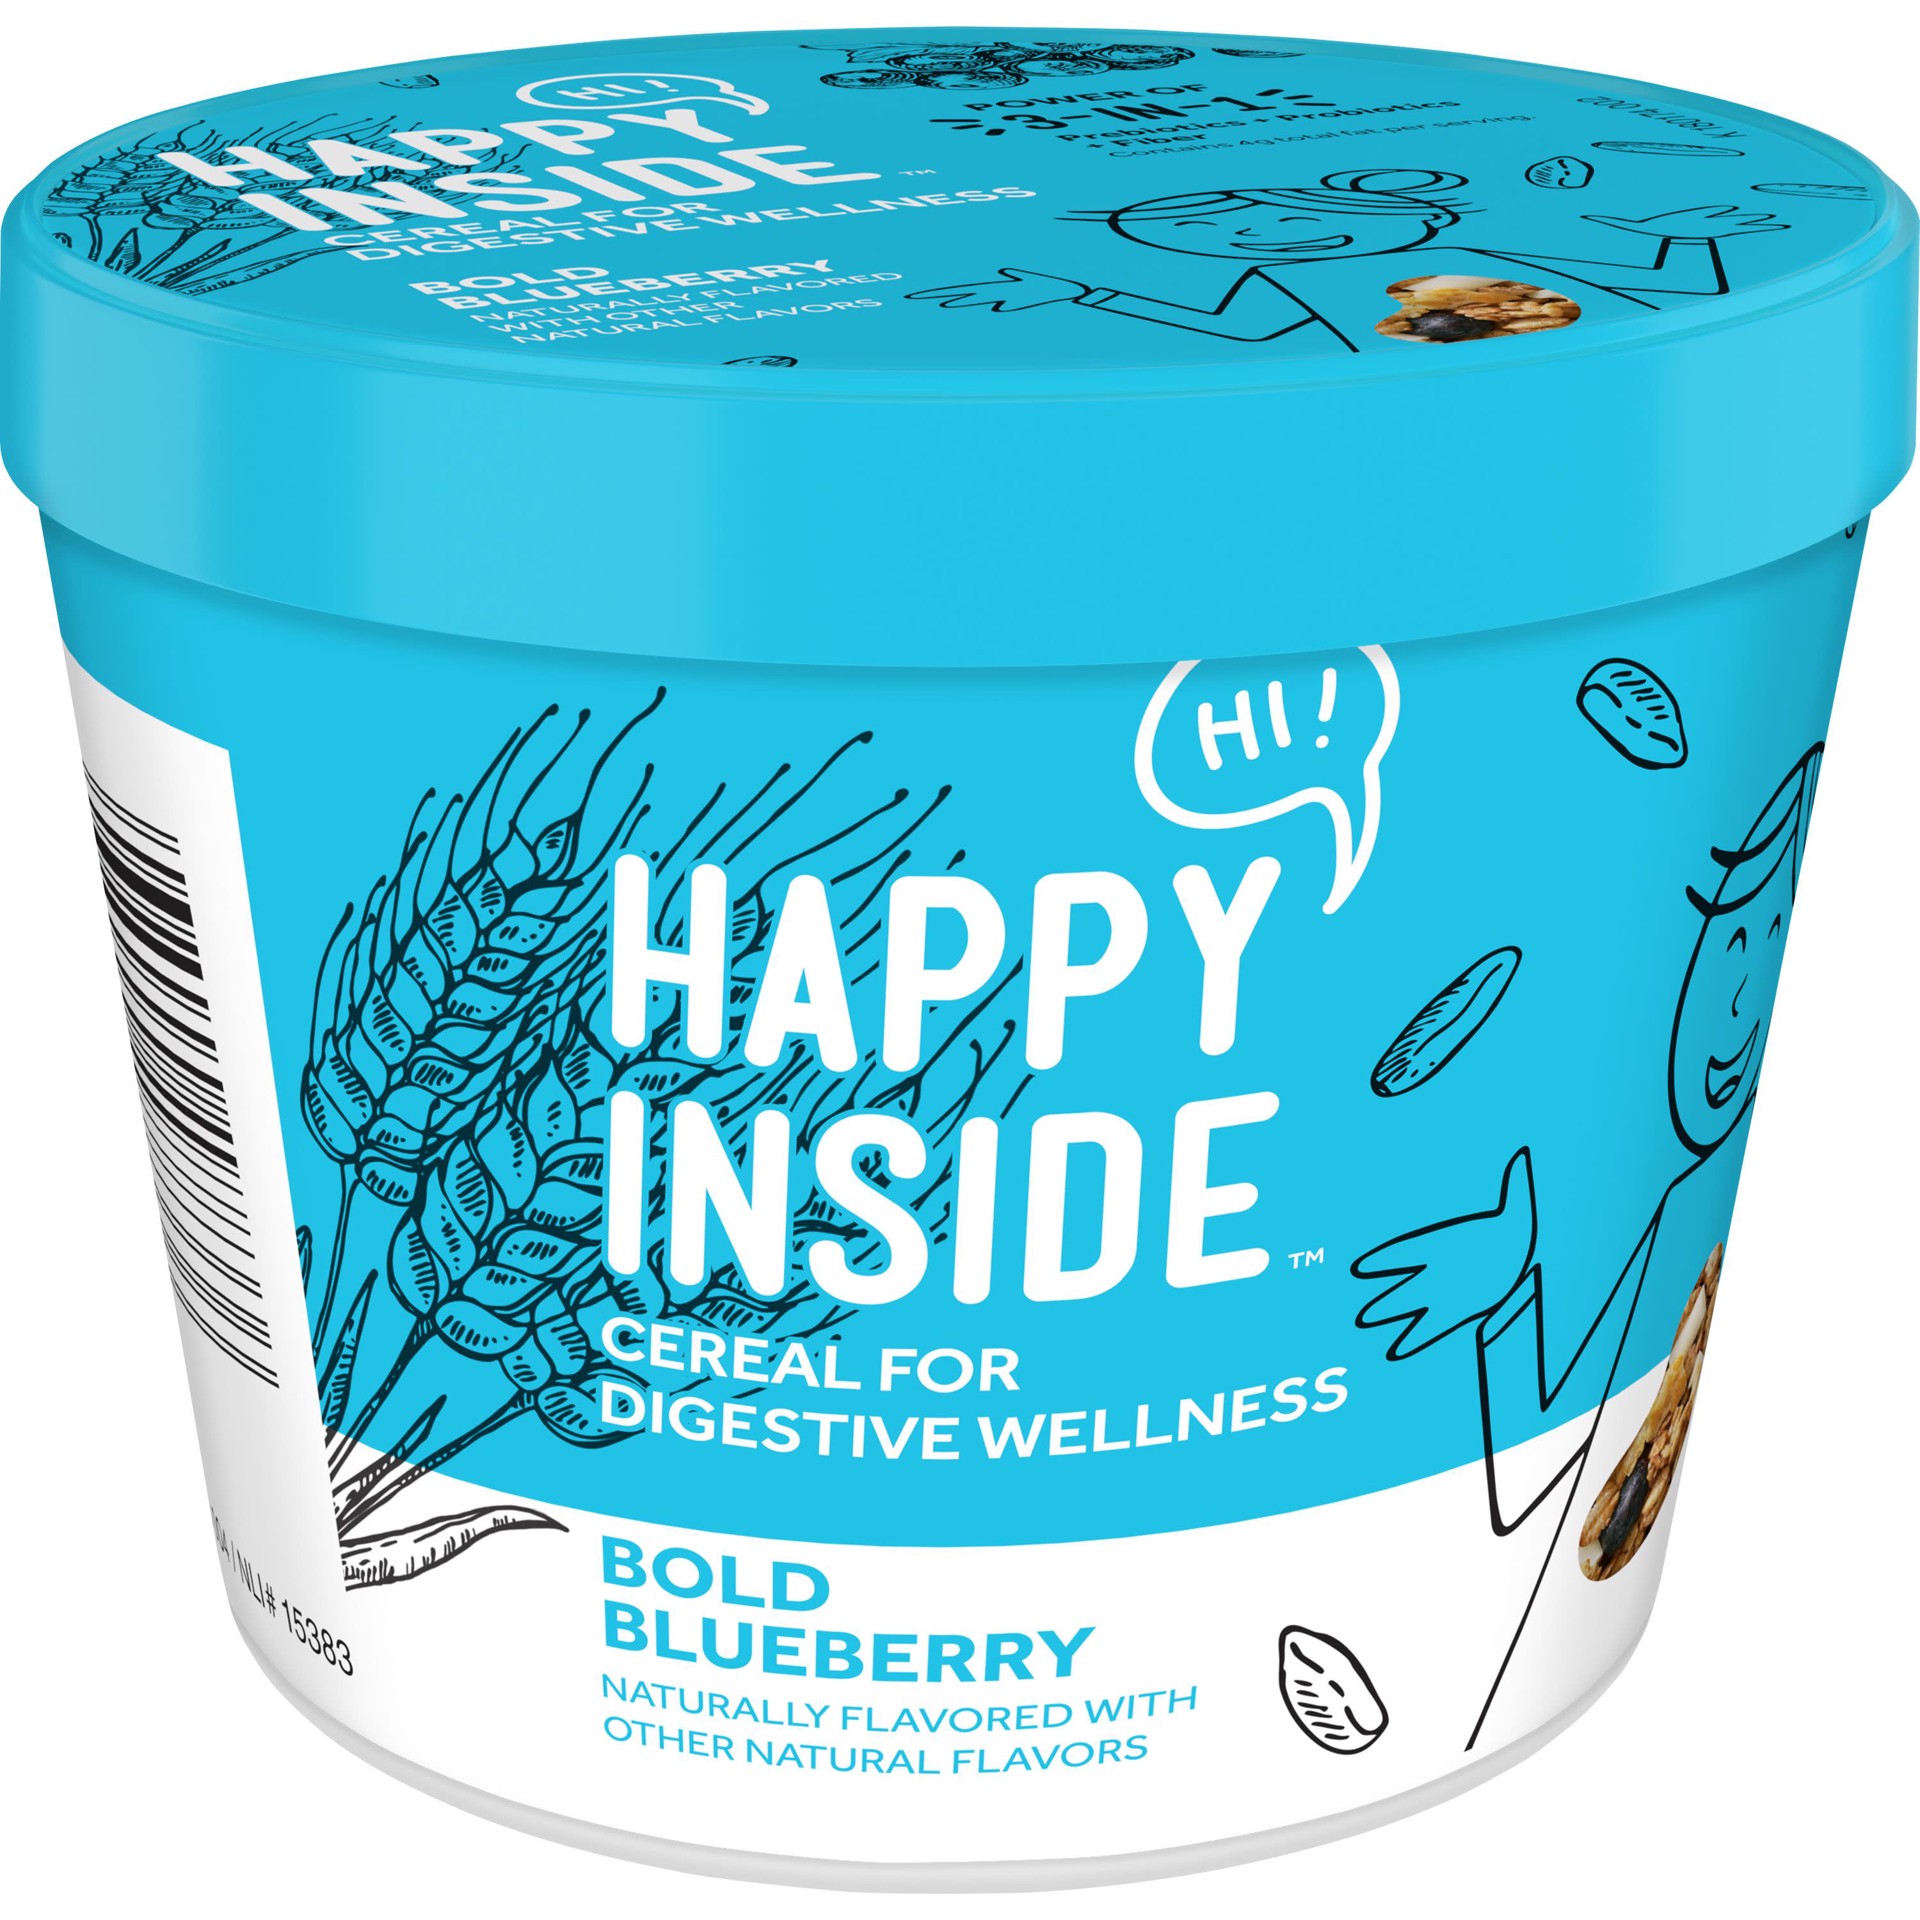 slide 1 of 5, HI! Happy Inside, Breakfast Cereal, Bold Blueberry, with Prebiotics, Probiotics and Fiber for Digestive Wellness, Non-GMO, 1.94oz Cup, 1.94 oz